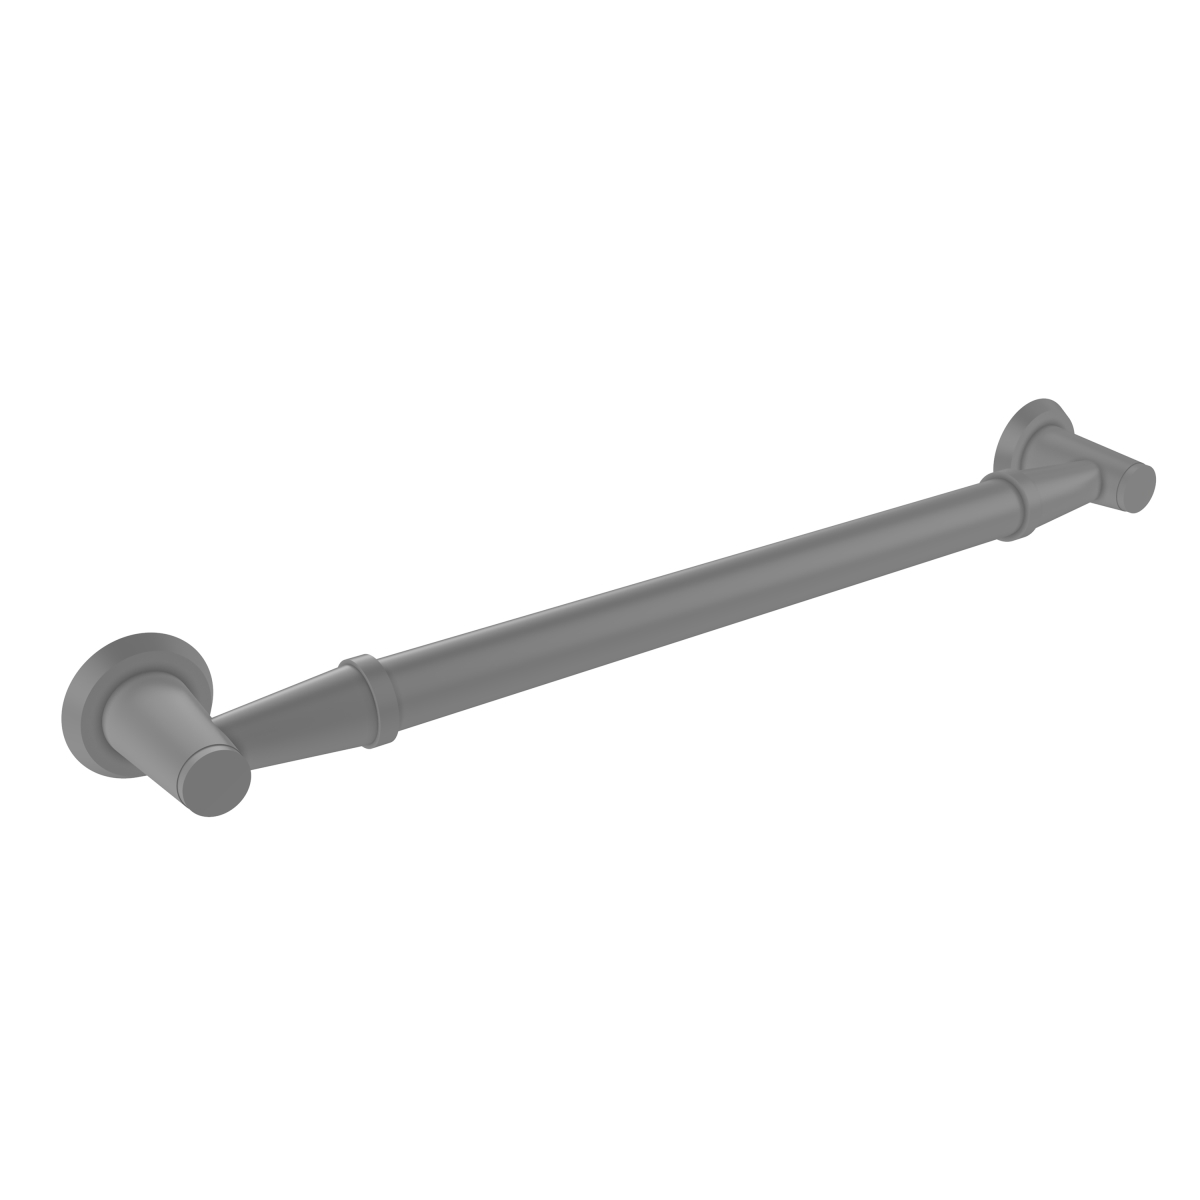 Picture of Allied Brass MD-GRS-16-GYM 16 in. Grab Bar Smooth, Matte Gray - 3.5 x 18 x 16 in.